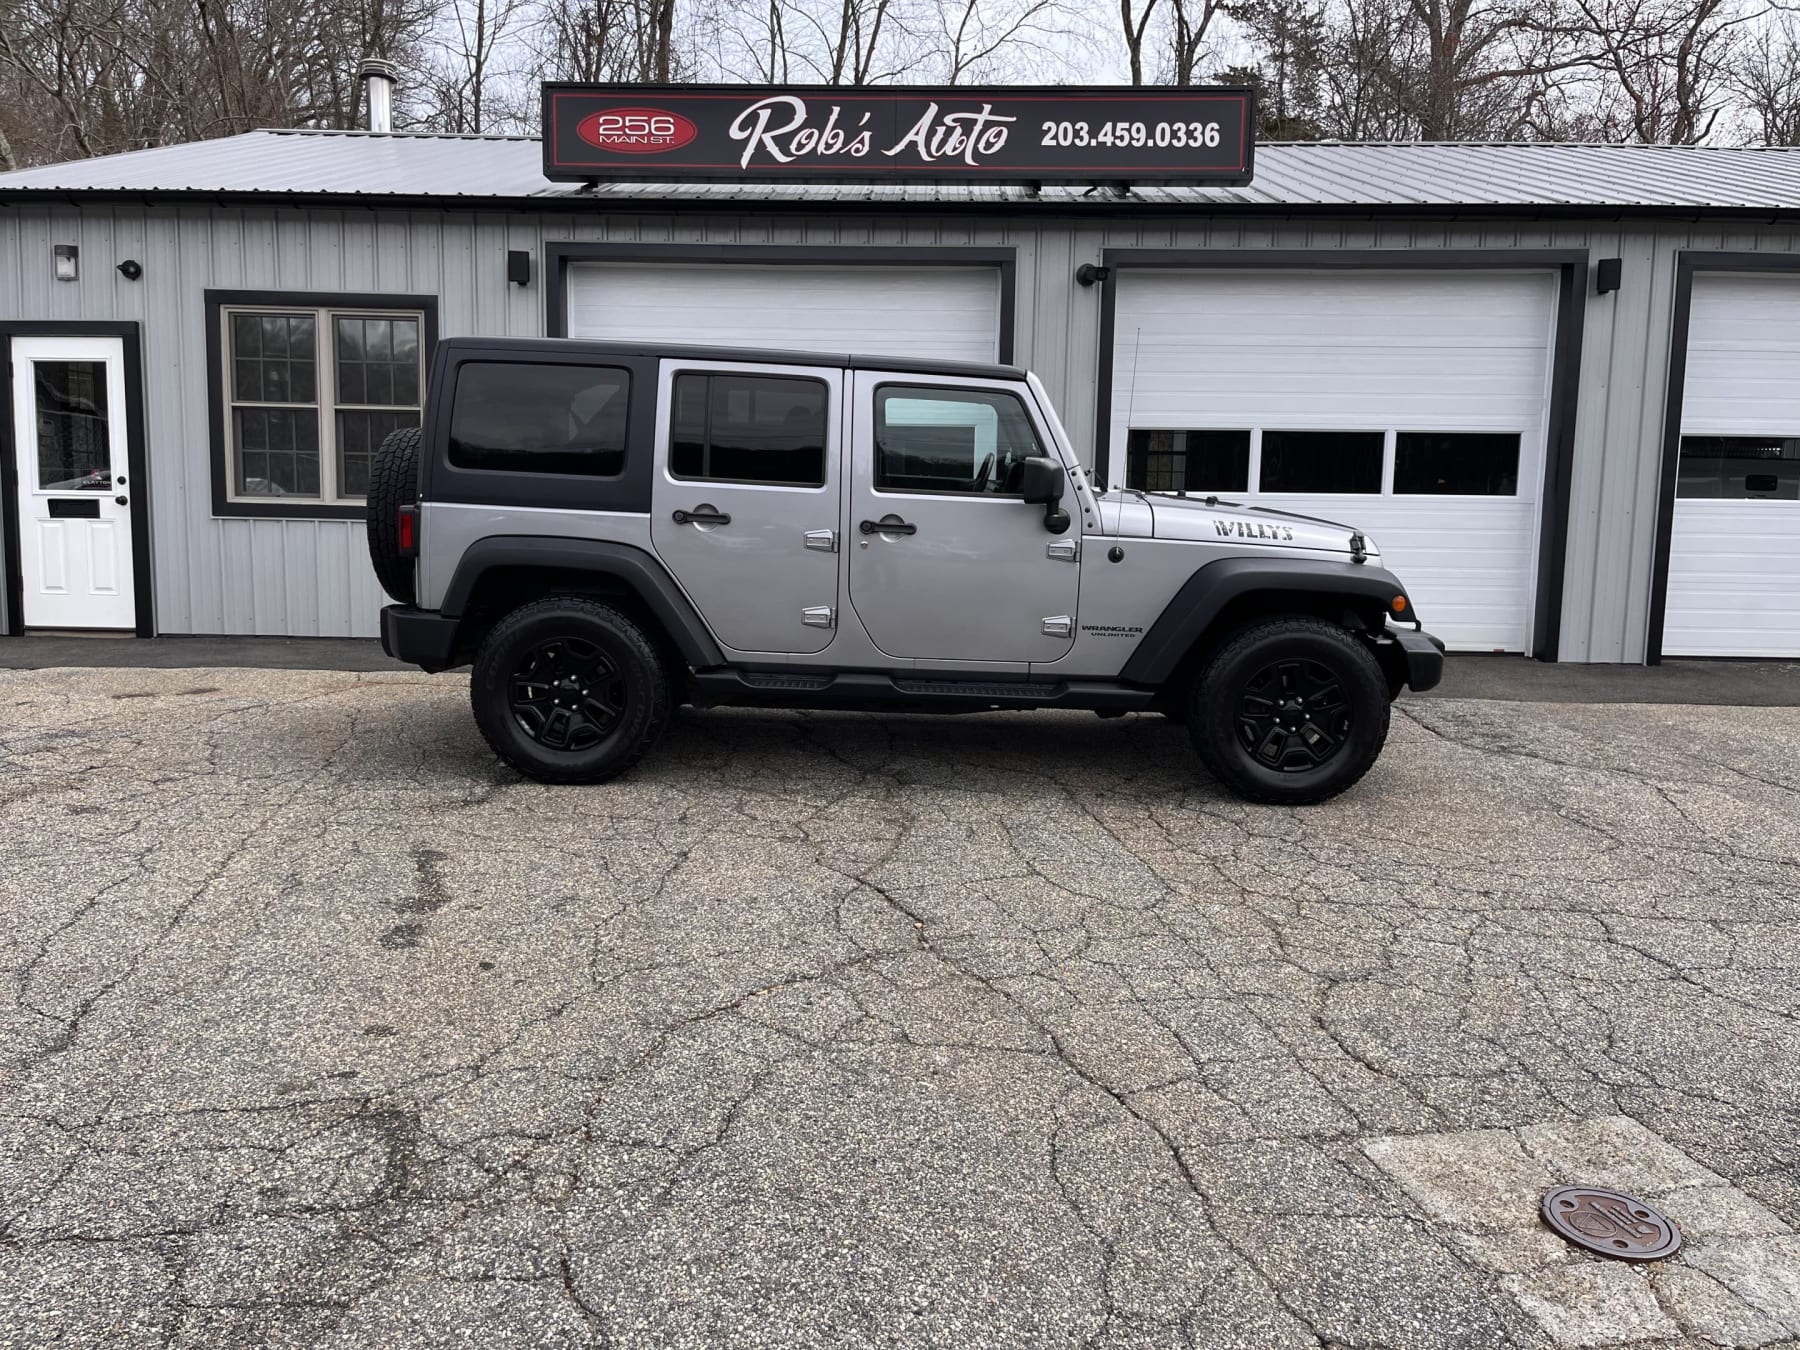 NEW ARRIVAL!!! 2016 Jeep Unlimited Willys Wheeler! Extremely clean! Clean carfax! 6 speed manual transmission! Power windows, power locks, Bluetooth, factory upgraded alpine stereo and much more! All highway miles! Runs and drives great! 145k miles! Won’t last at $16,900!!